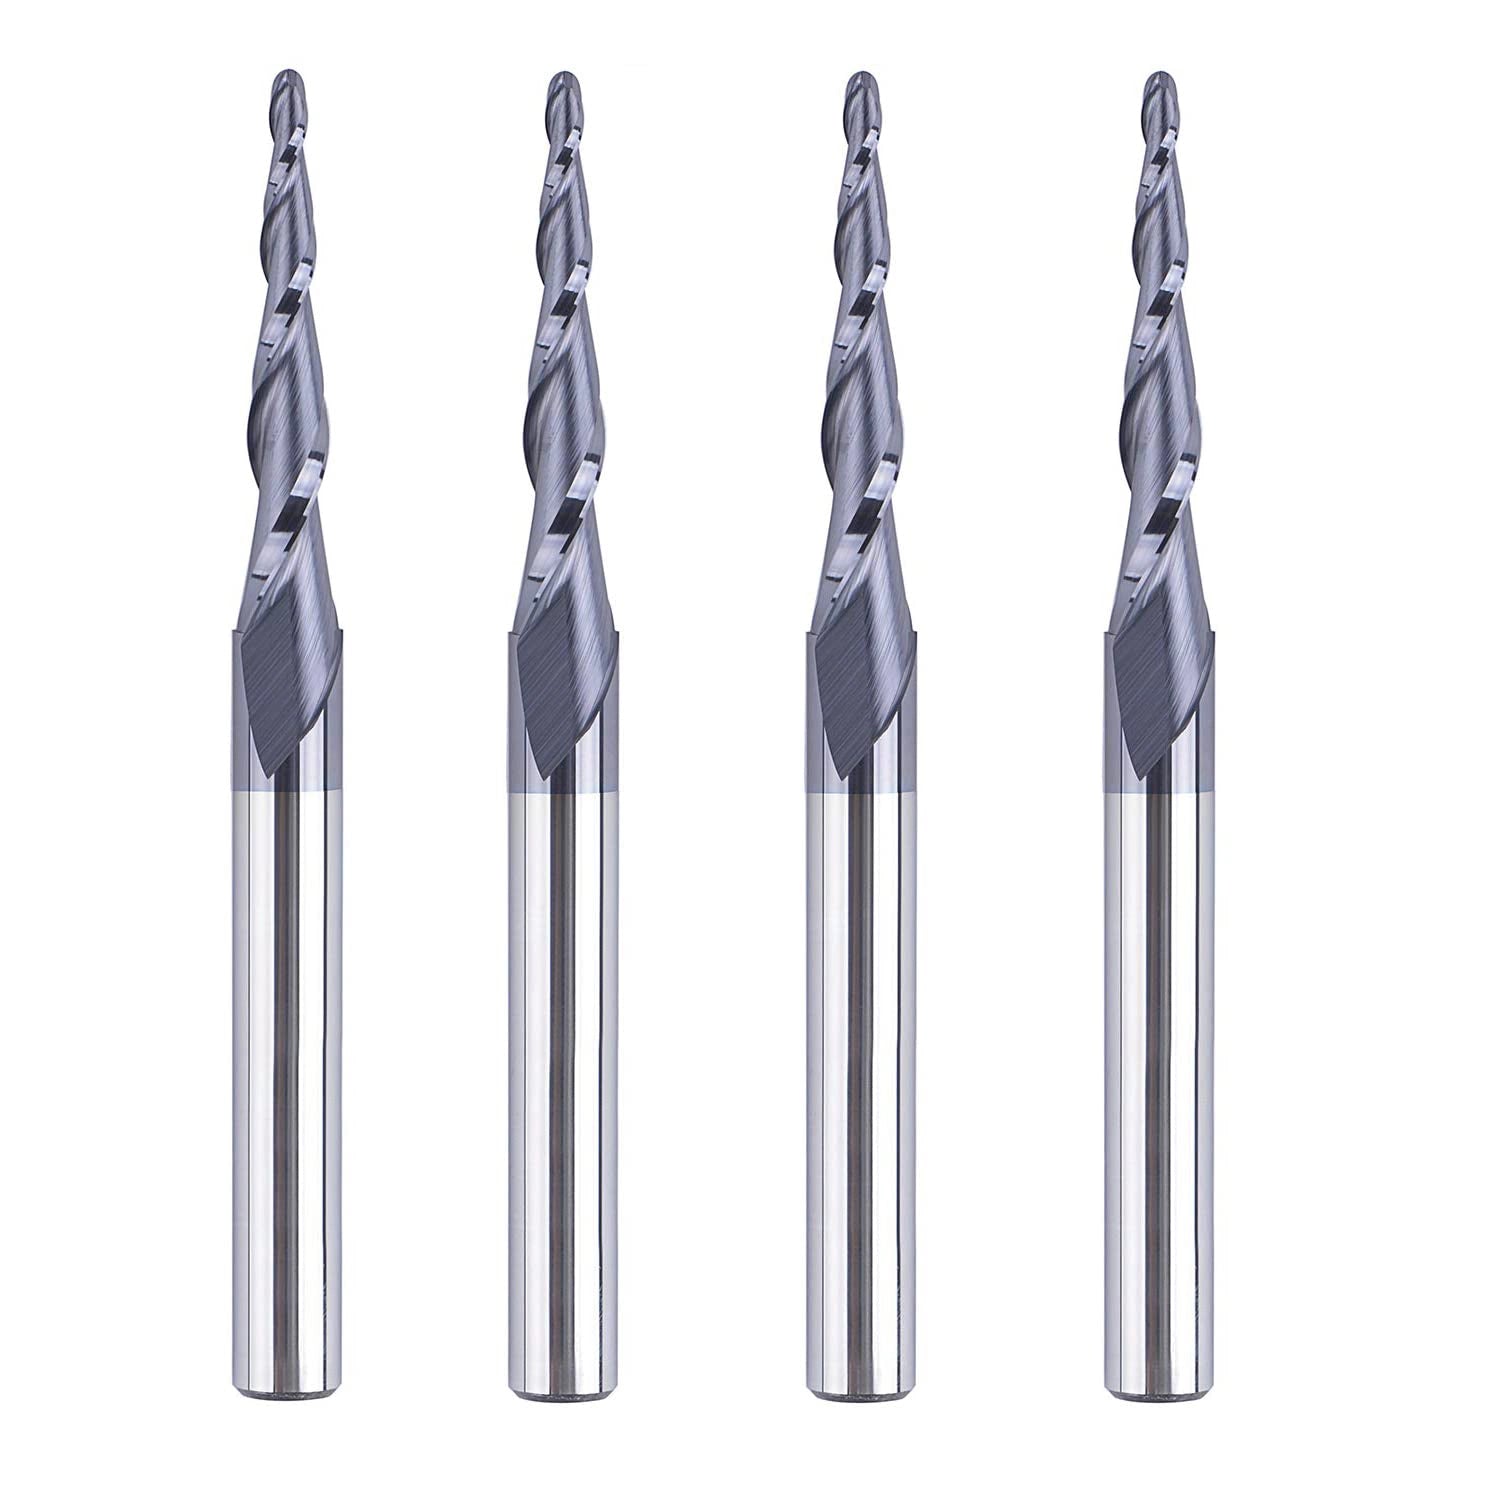 SpeTool W01010 CNC 2D and 3D Carving 3.92 Deg Tapered Angle Ball Nose 1.0mm Radius x 1/4" Shank x 1-1/4" Cutting Length x 3" Long 2 Flute SC TiAlN Coated Upcut Router Bit